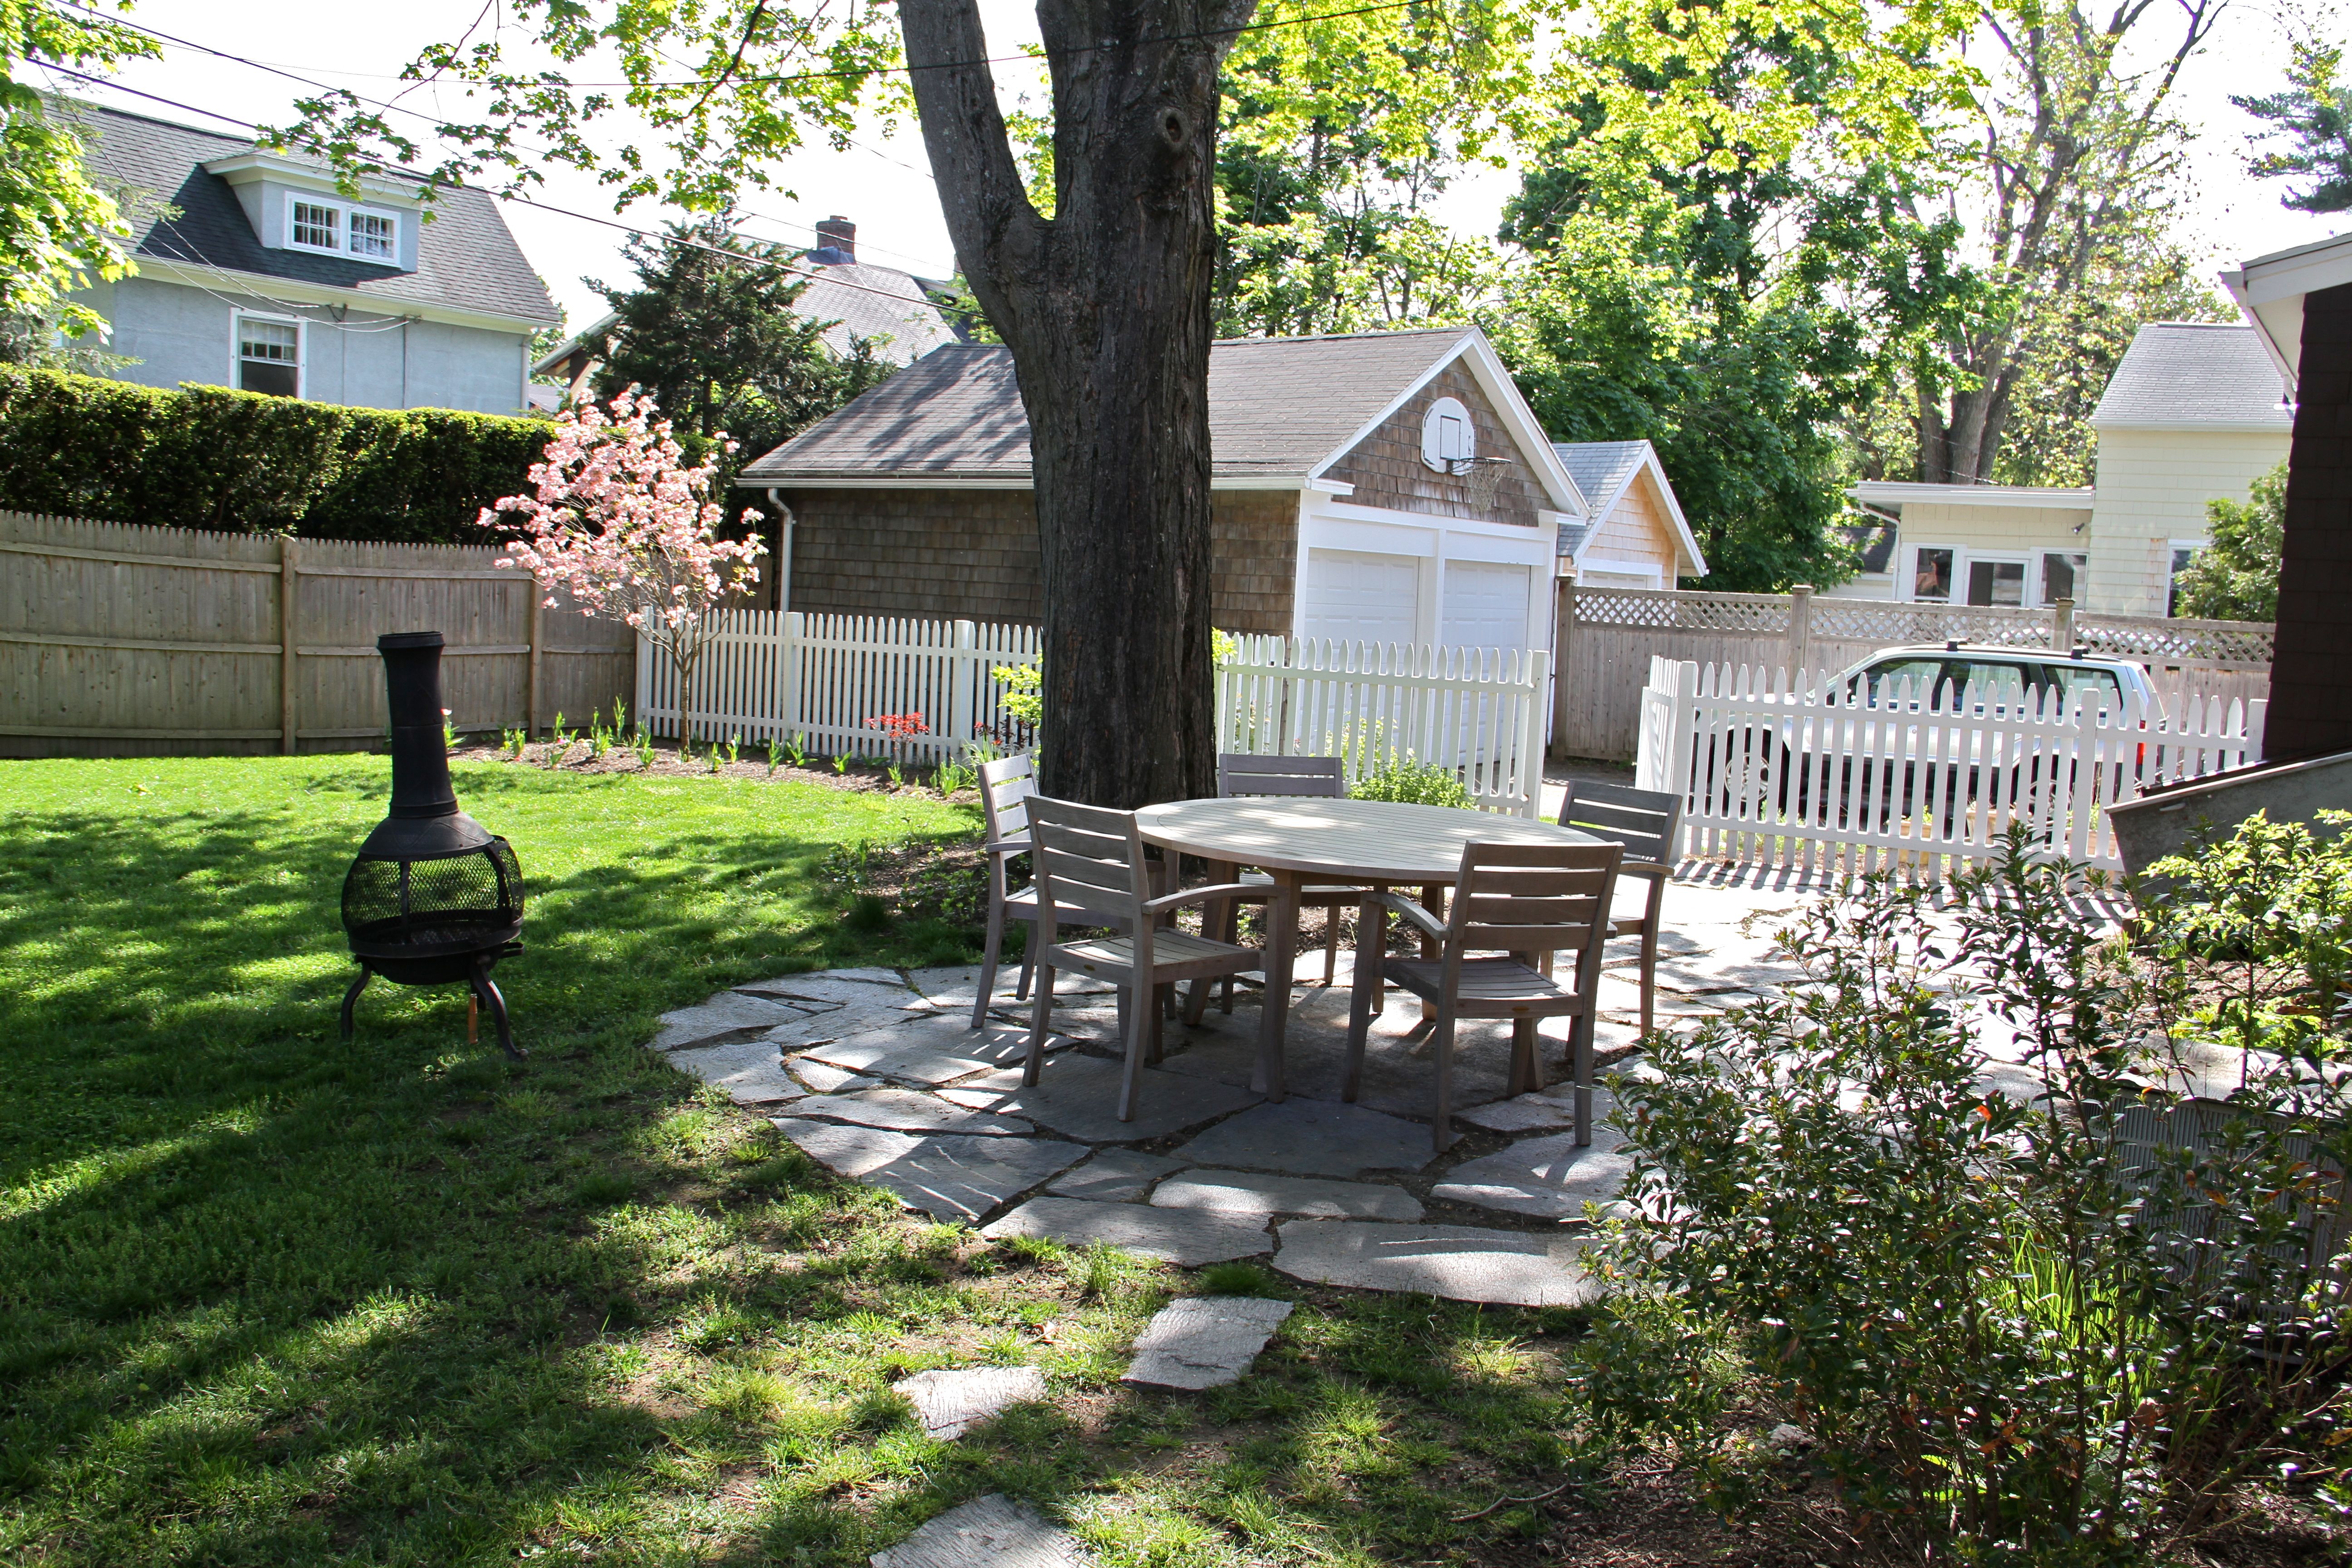 AFTER: The yard is getting there, and so are the trees. Soon it'll be time for BBQ's, fizzy bubbly drinks in the summer air, and warm breezes that lift your spirits and carry your troubles away. Ahhhh.